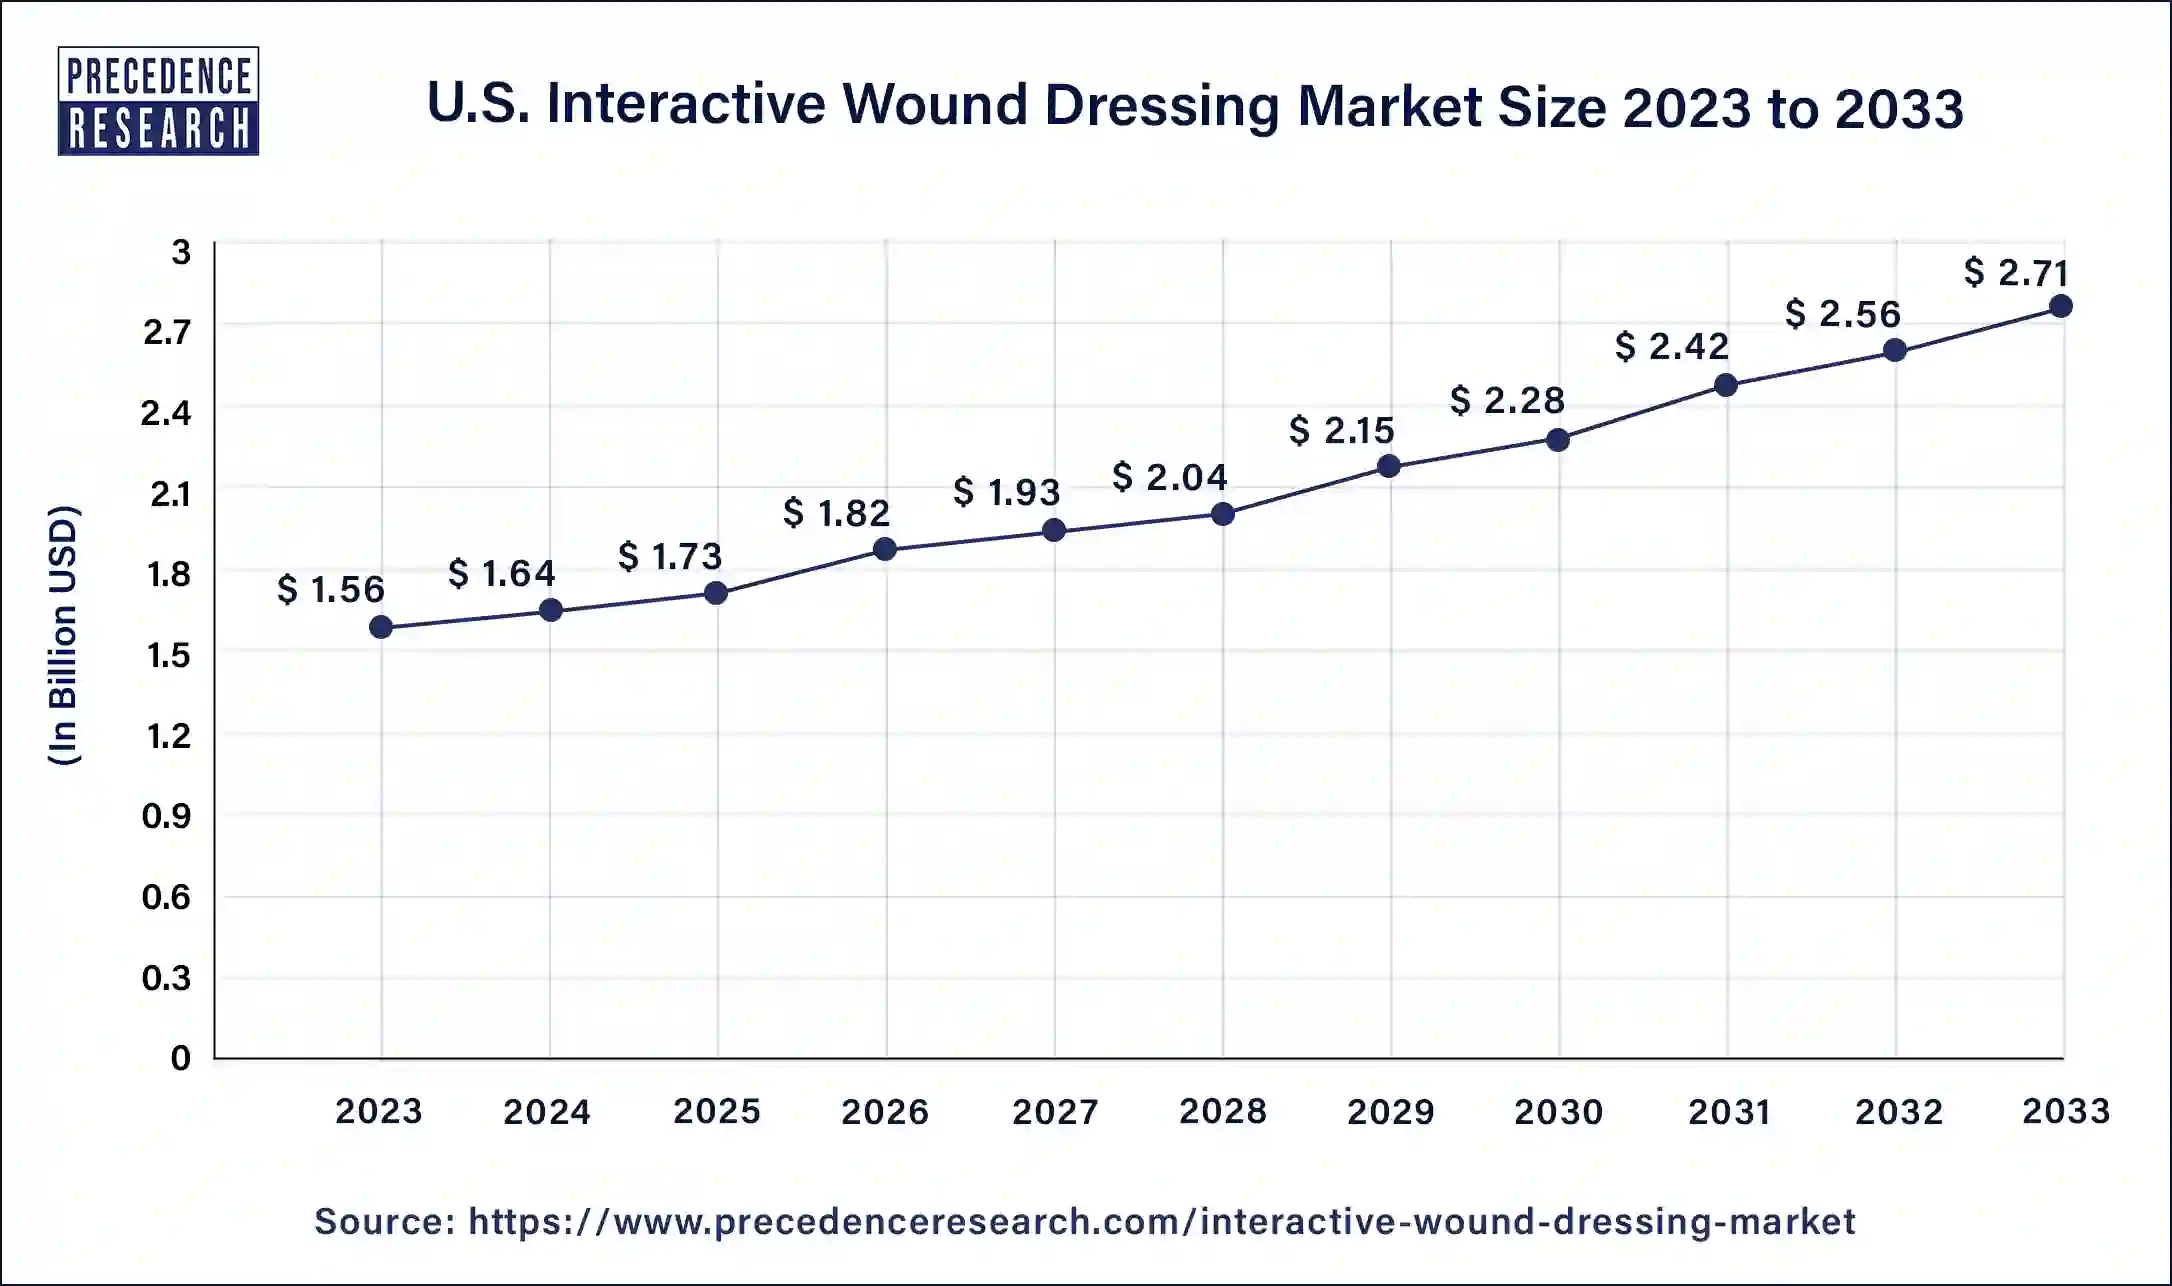 U.s. Interactive Wound Dressing Market Size 2024 to 2033